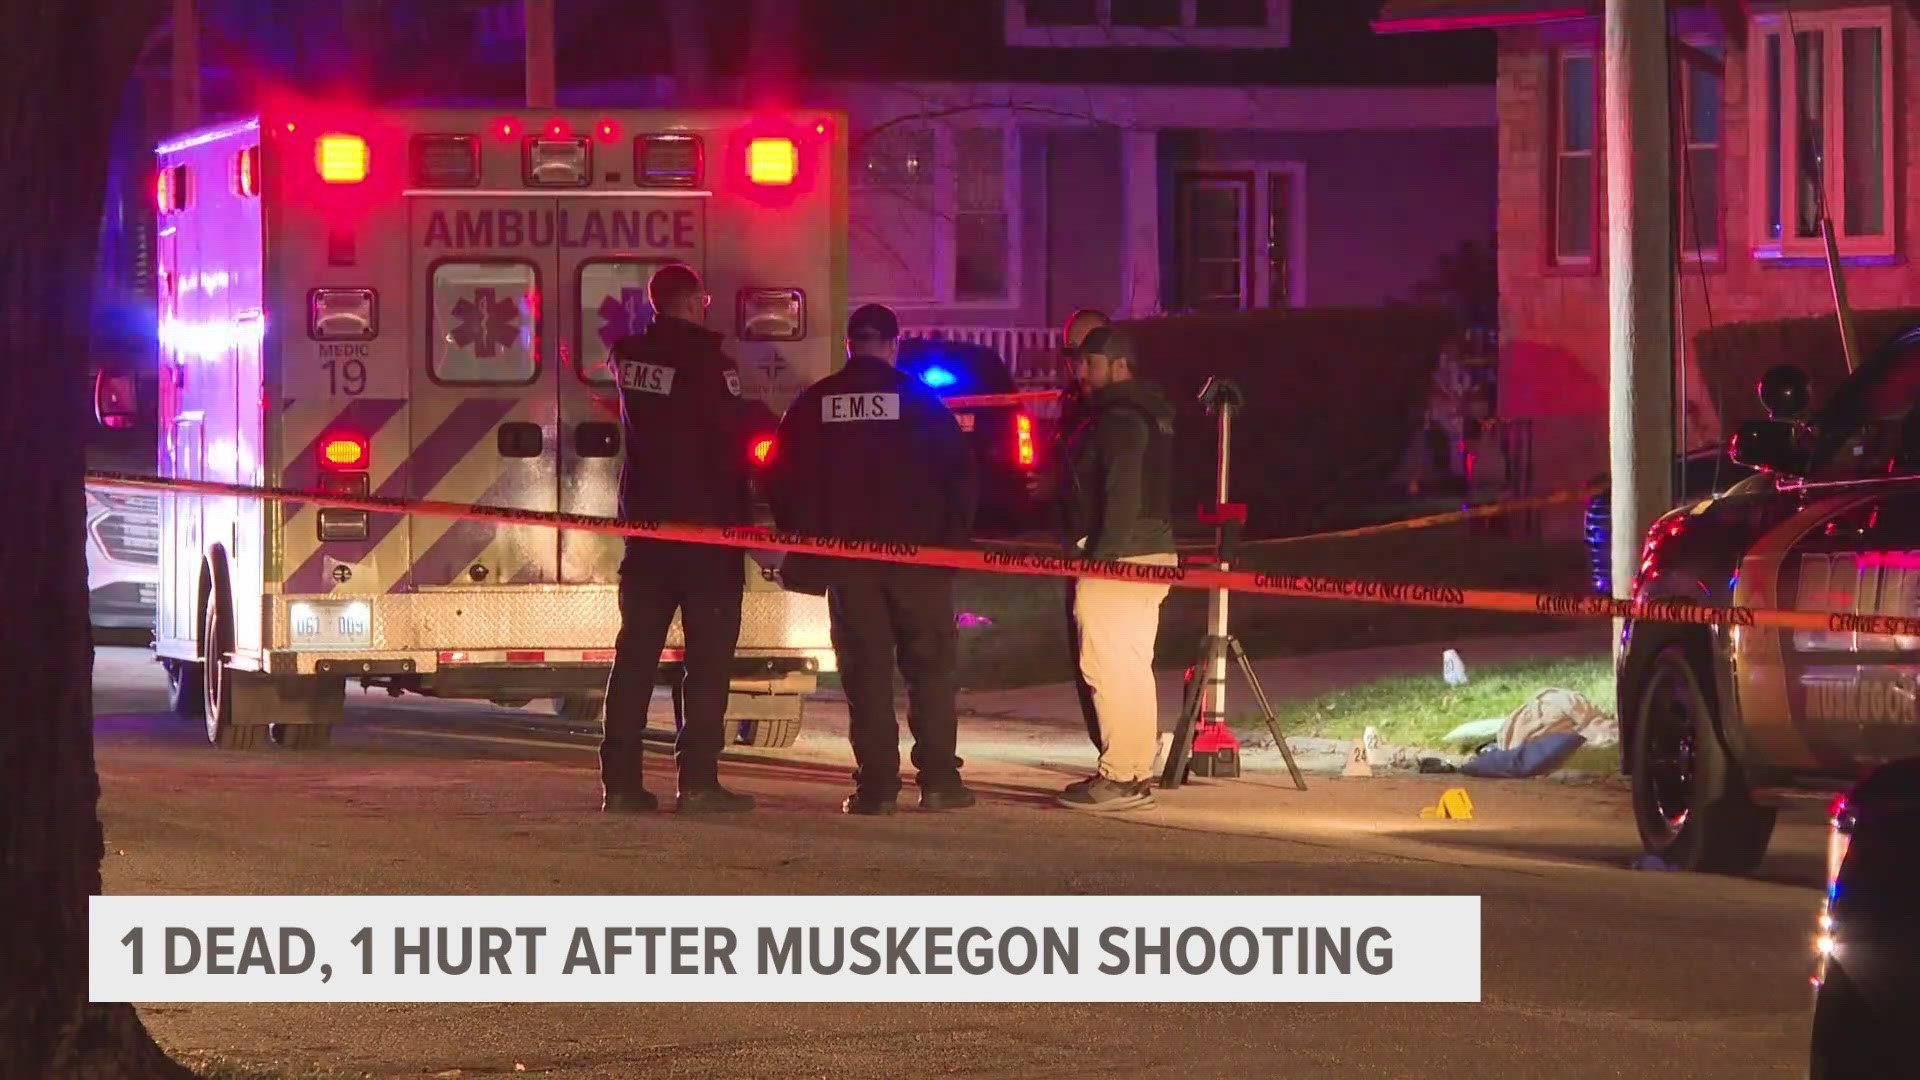 Authorities said a 28-year-old Muskegon man was shot and killed in the 100 block of West Larch Ave. early Monday evening. Another man took himself to the hospital.